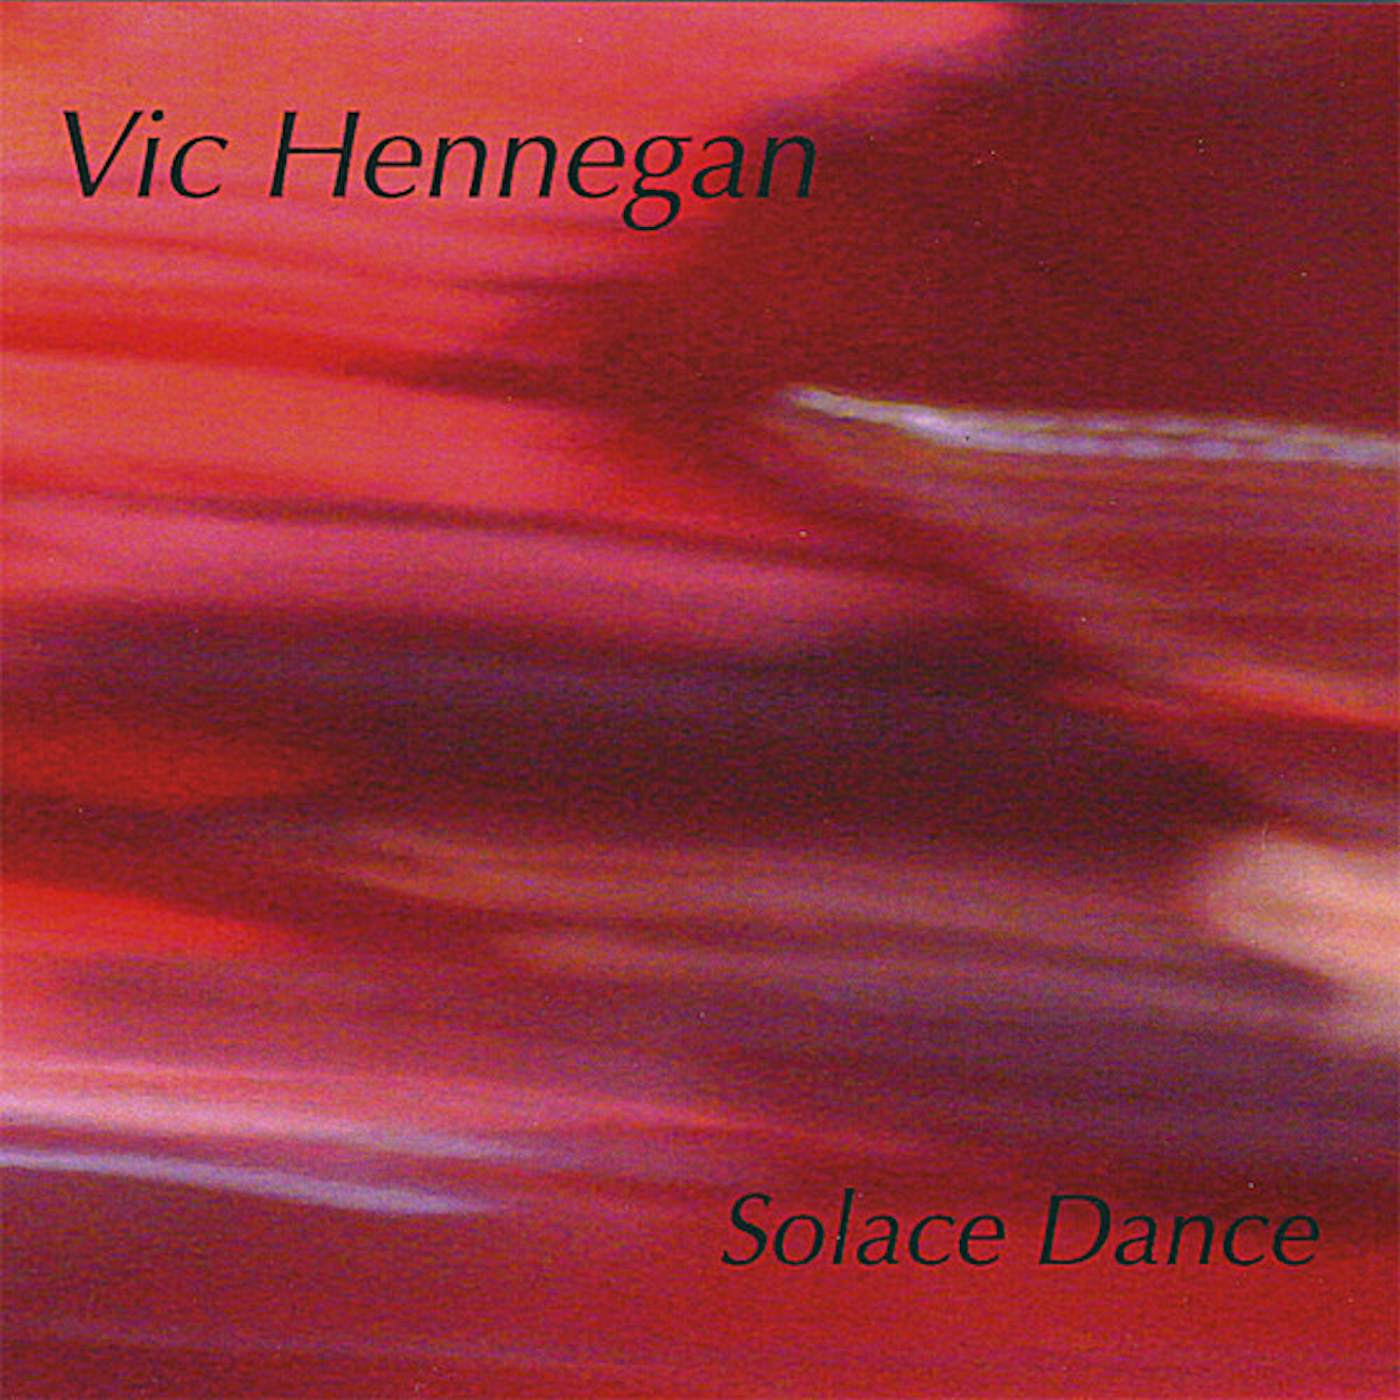 Vic Hennegan SOLACE DANCE CD